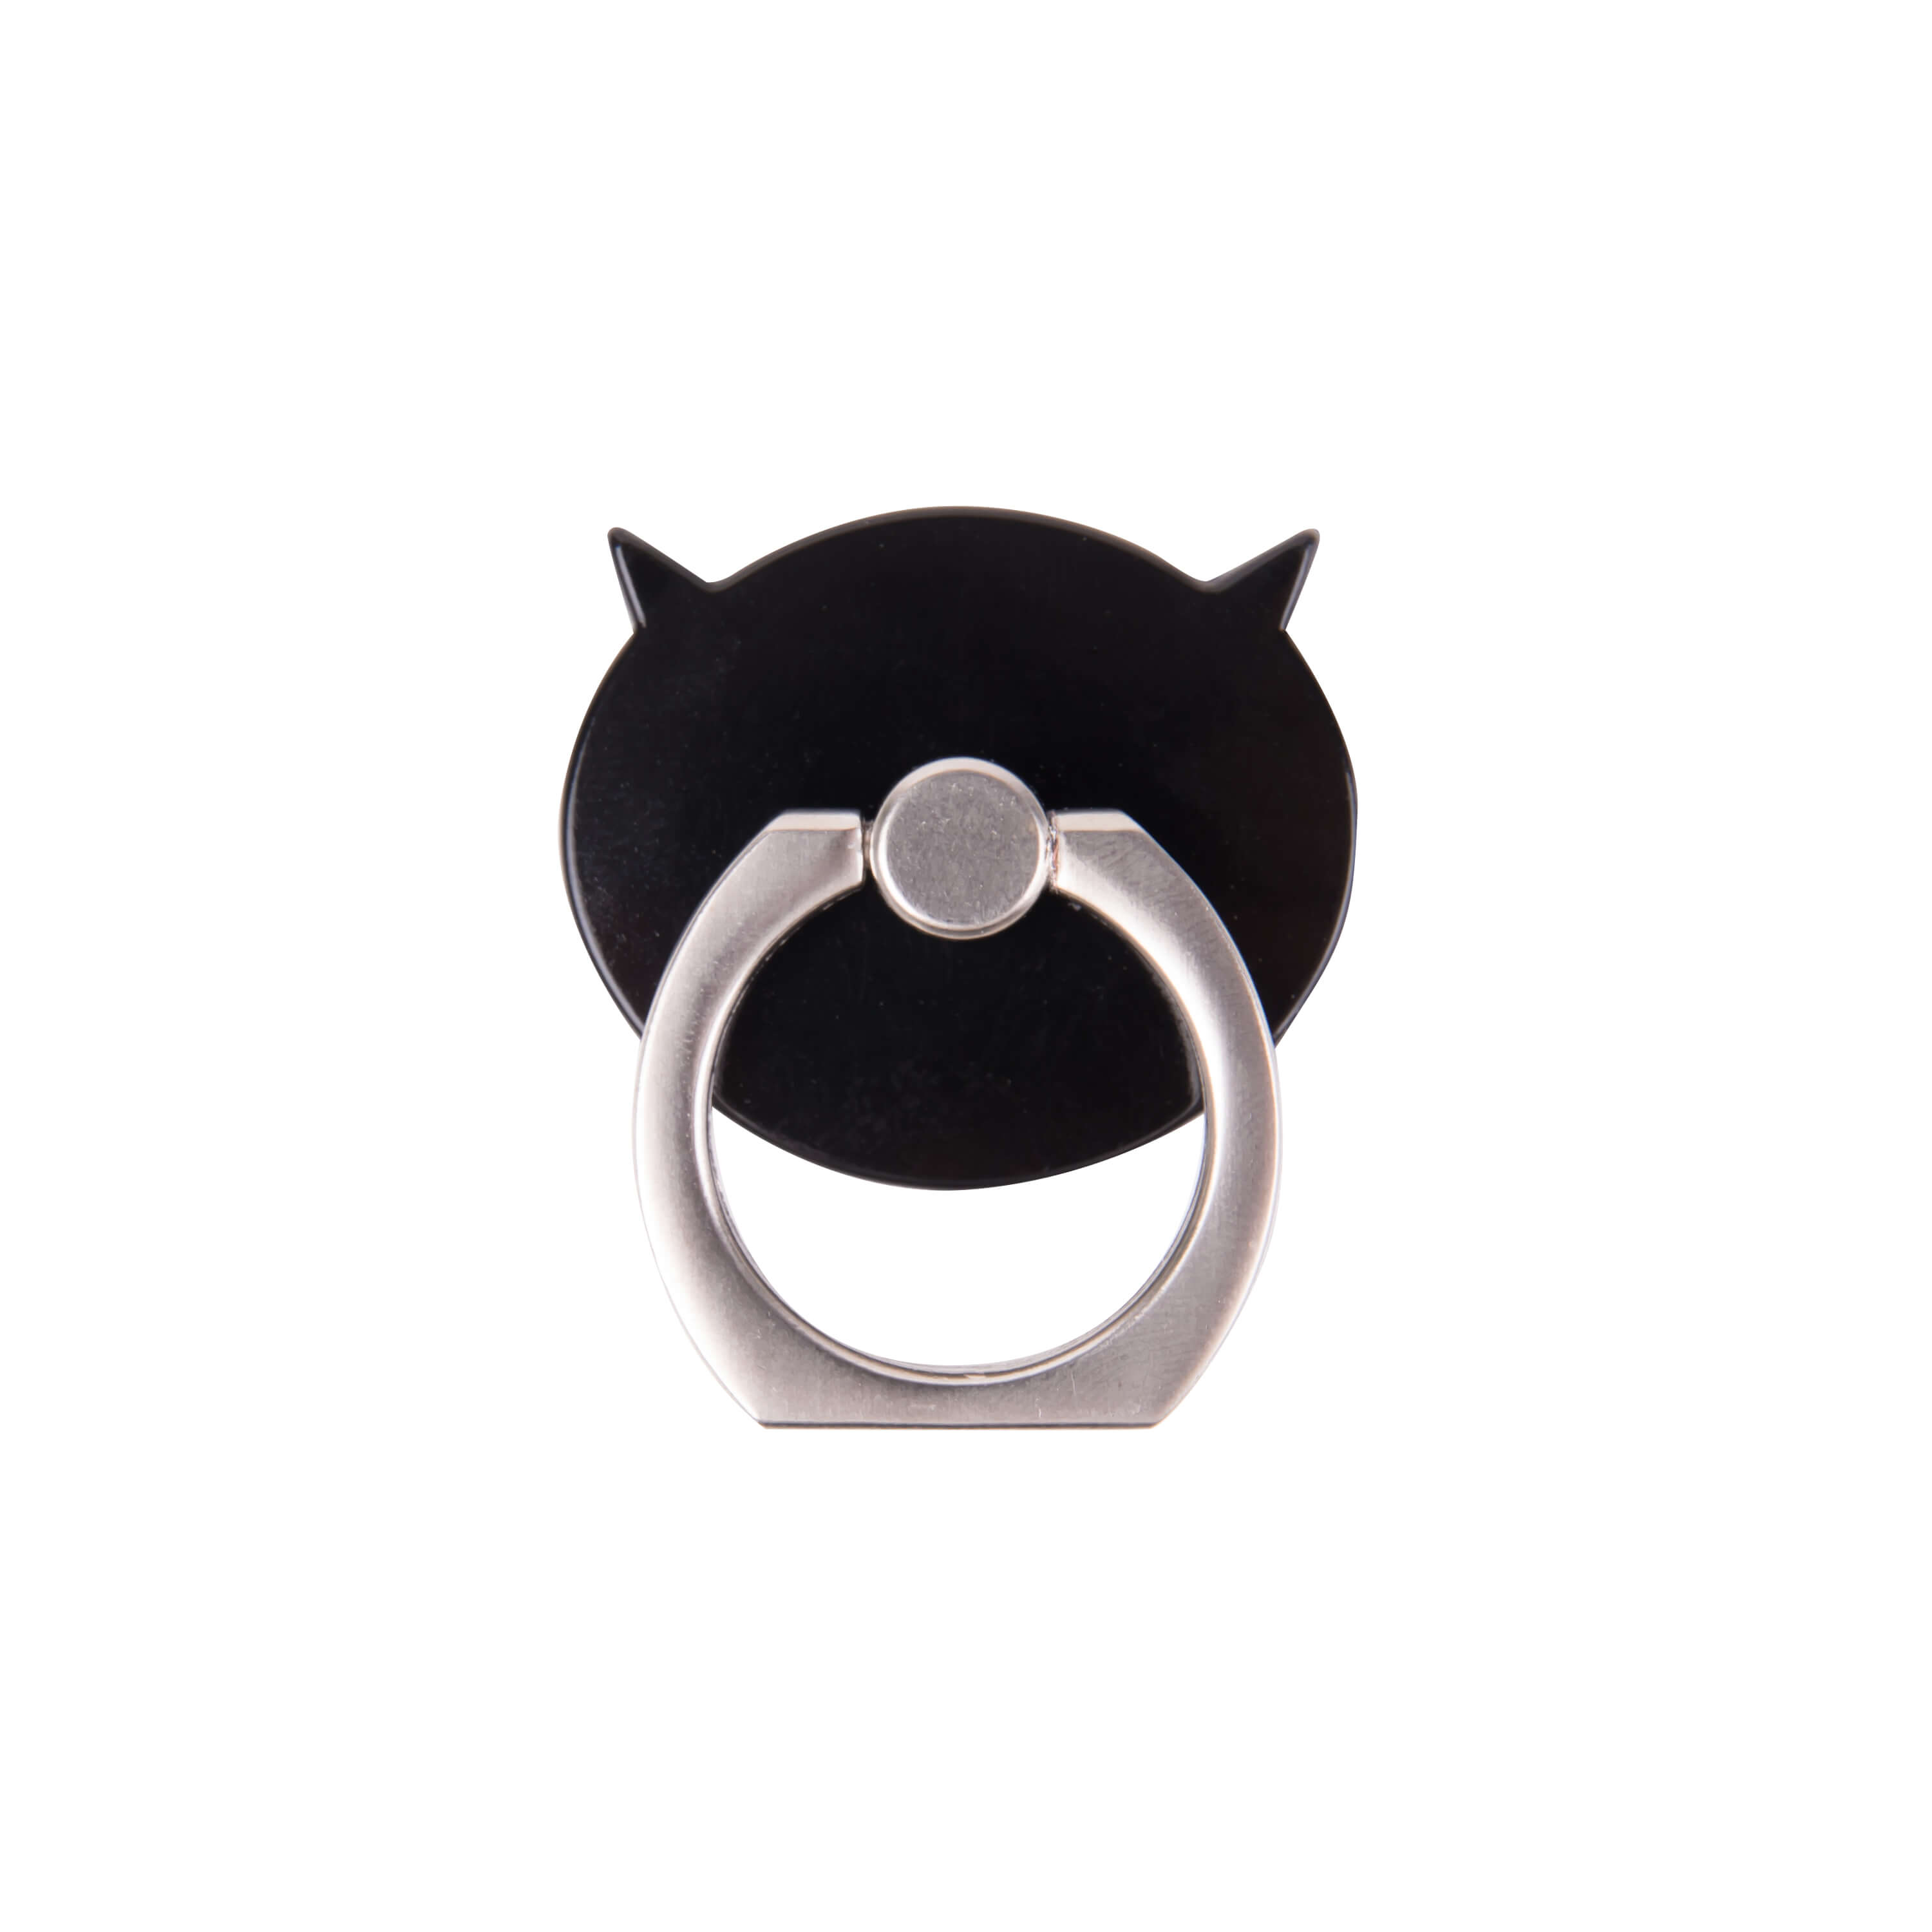 Finger ring round black with stand function